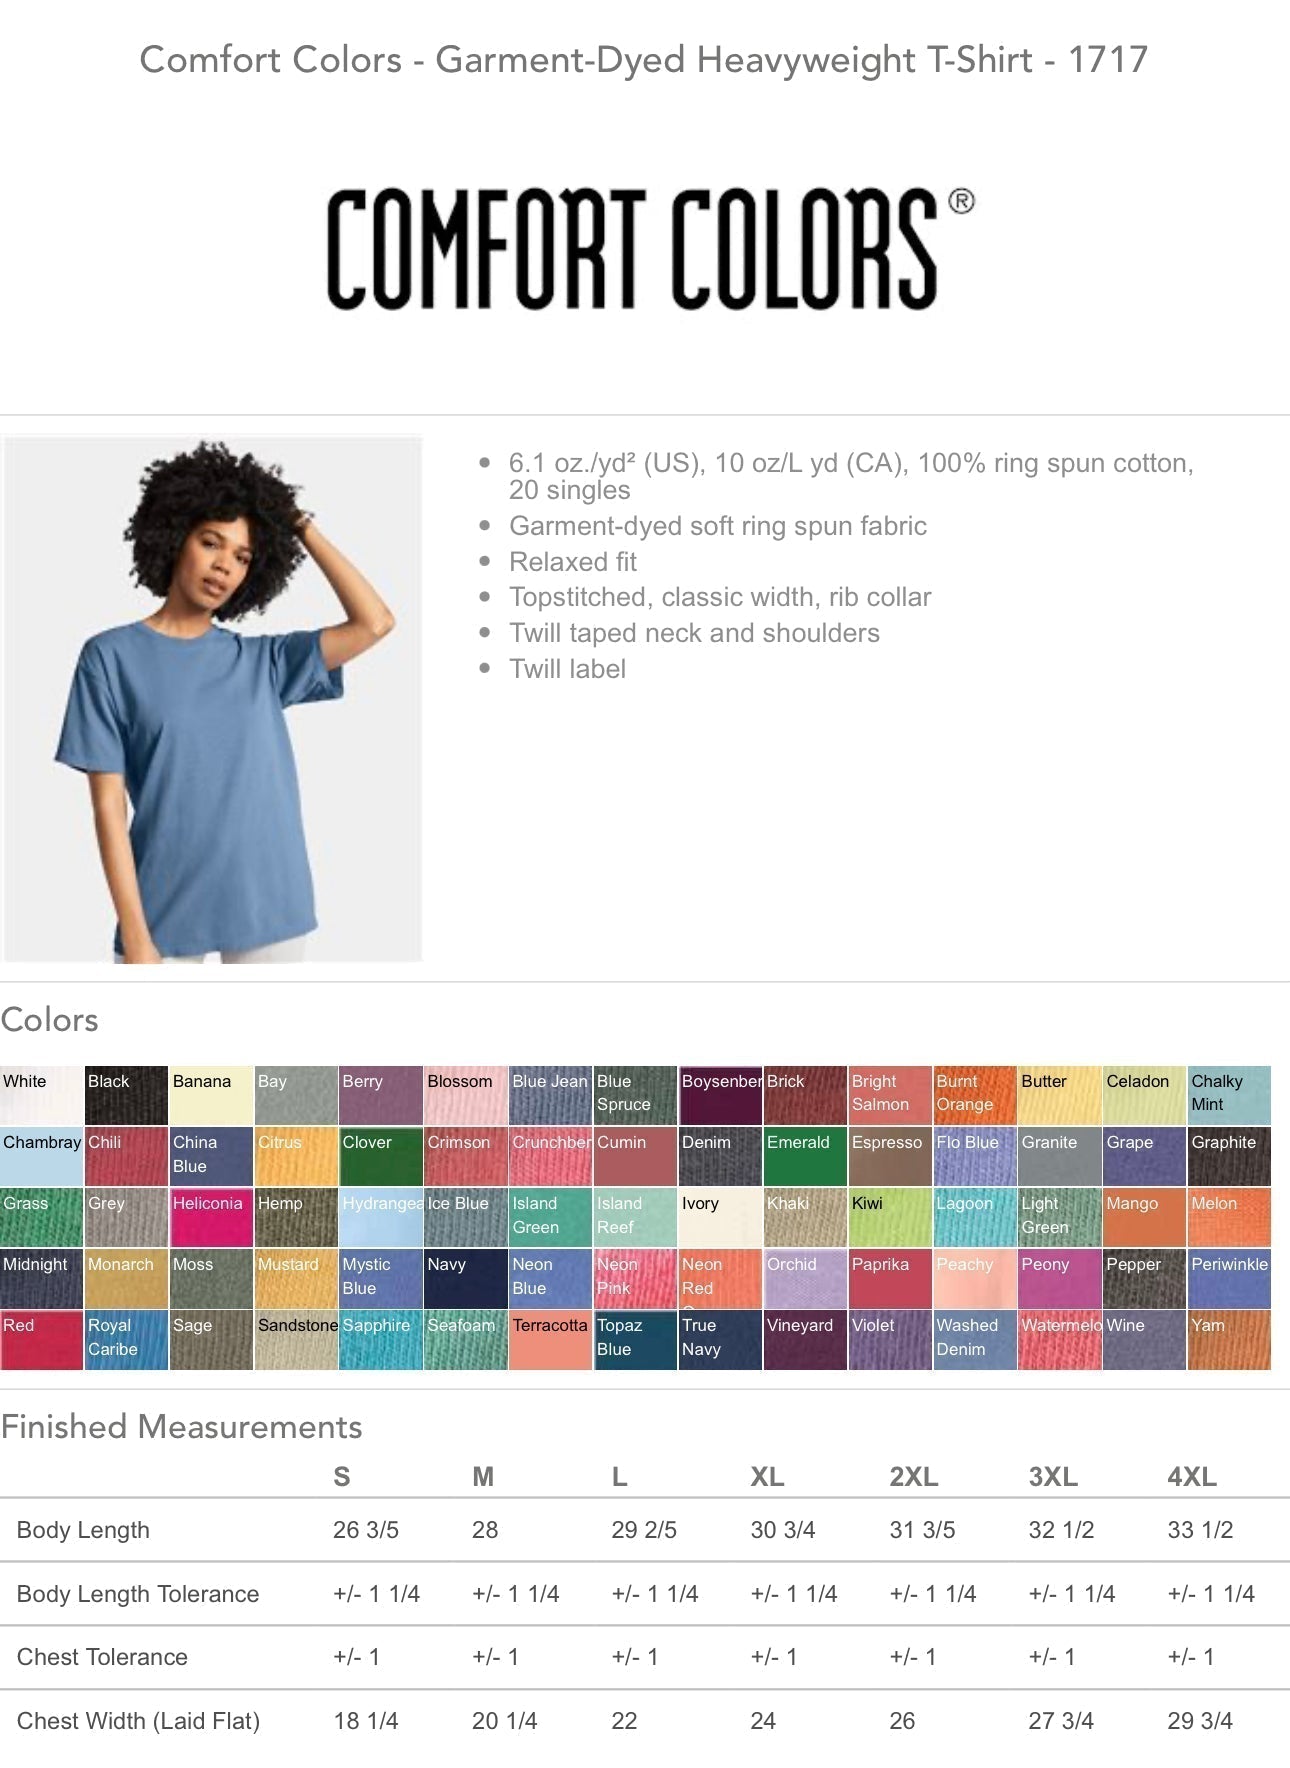 TREAT PEOPLE WITH KINDNESS-COMFORT COLOR